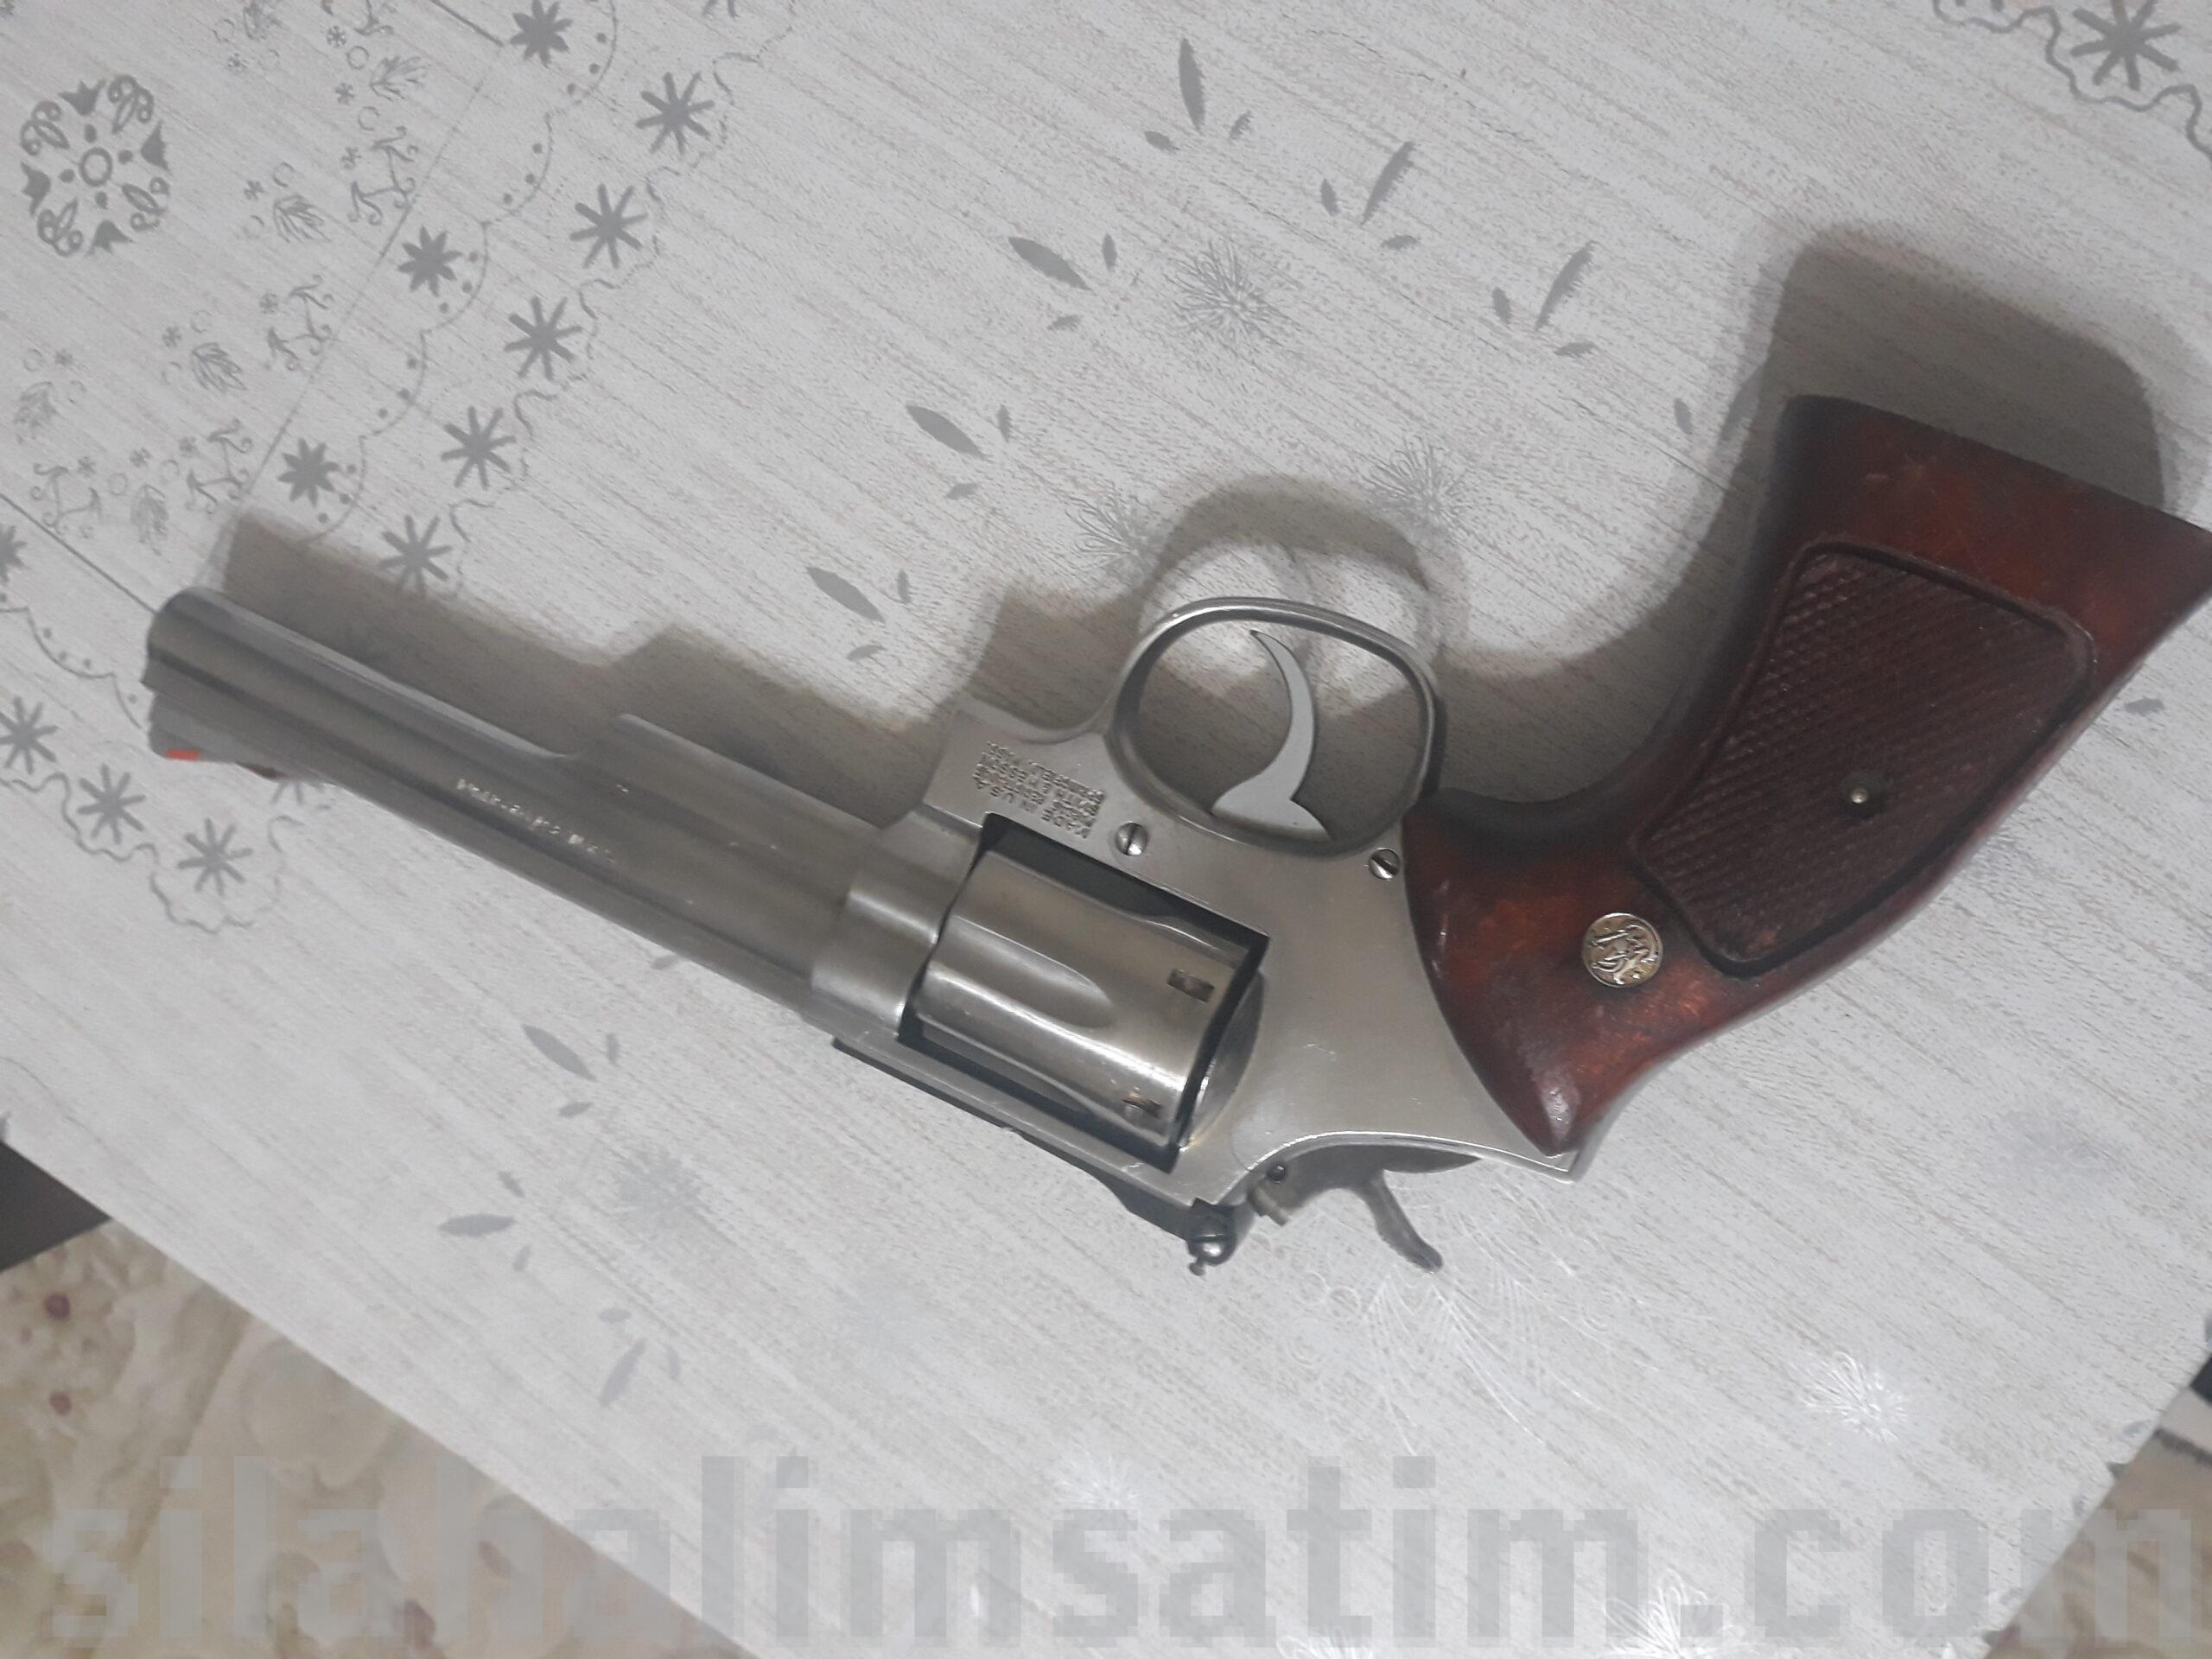 SMİTH WESSON 357 Magnum